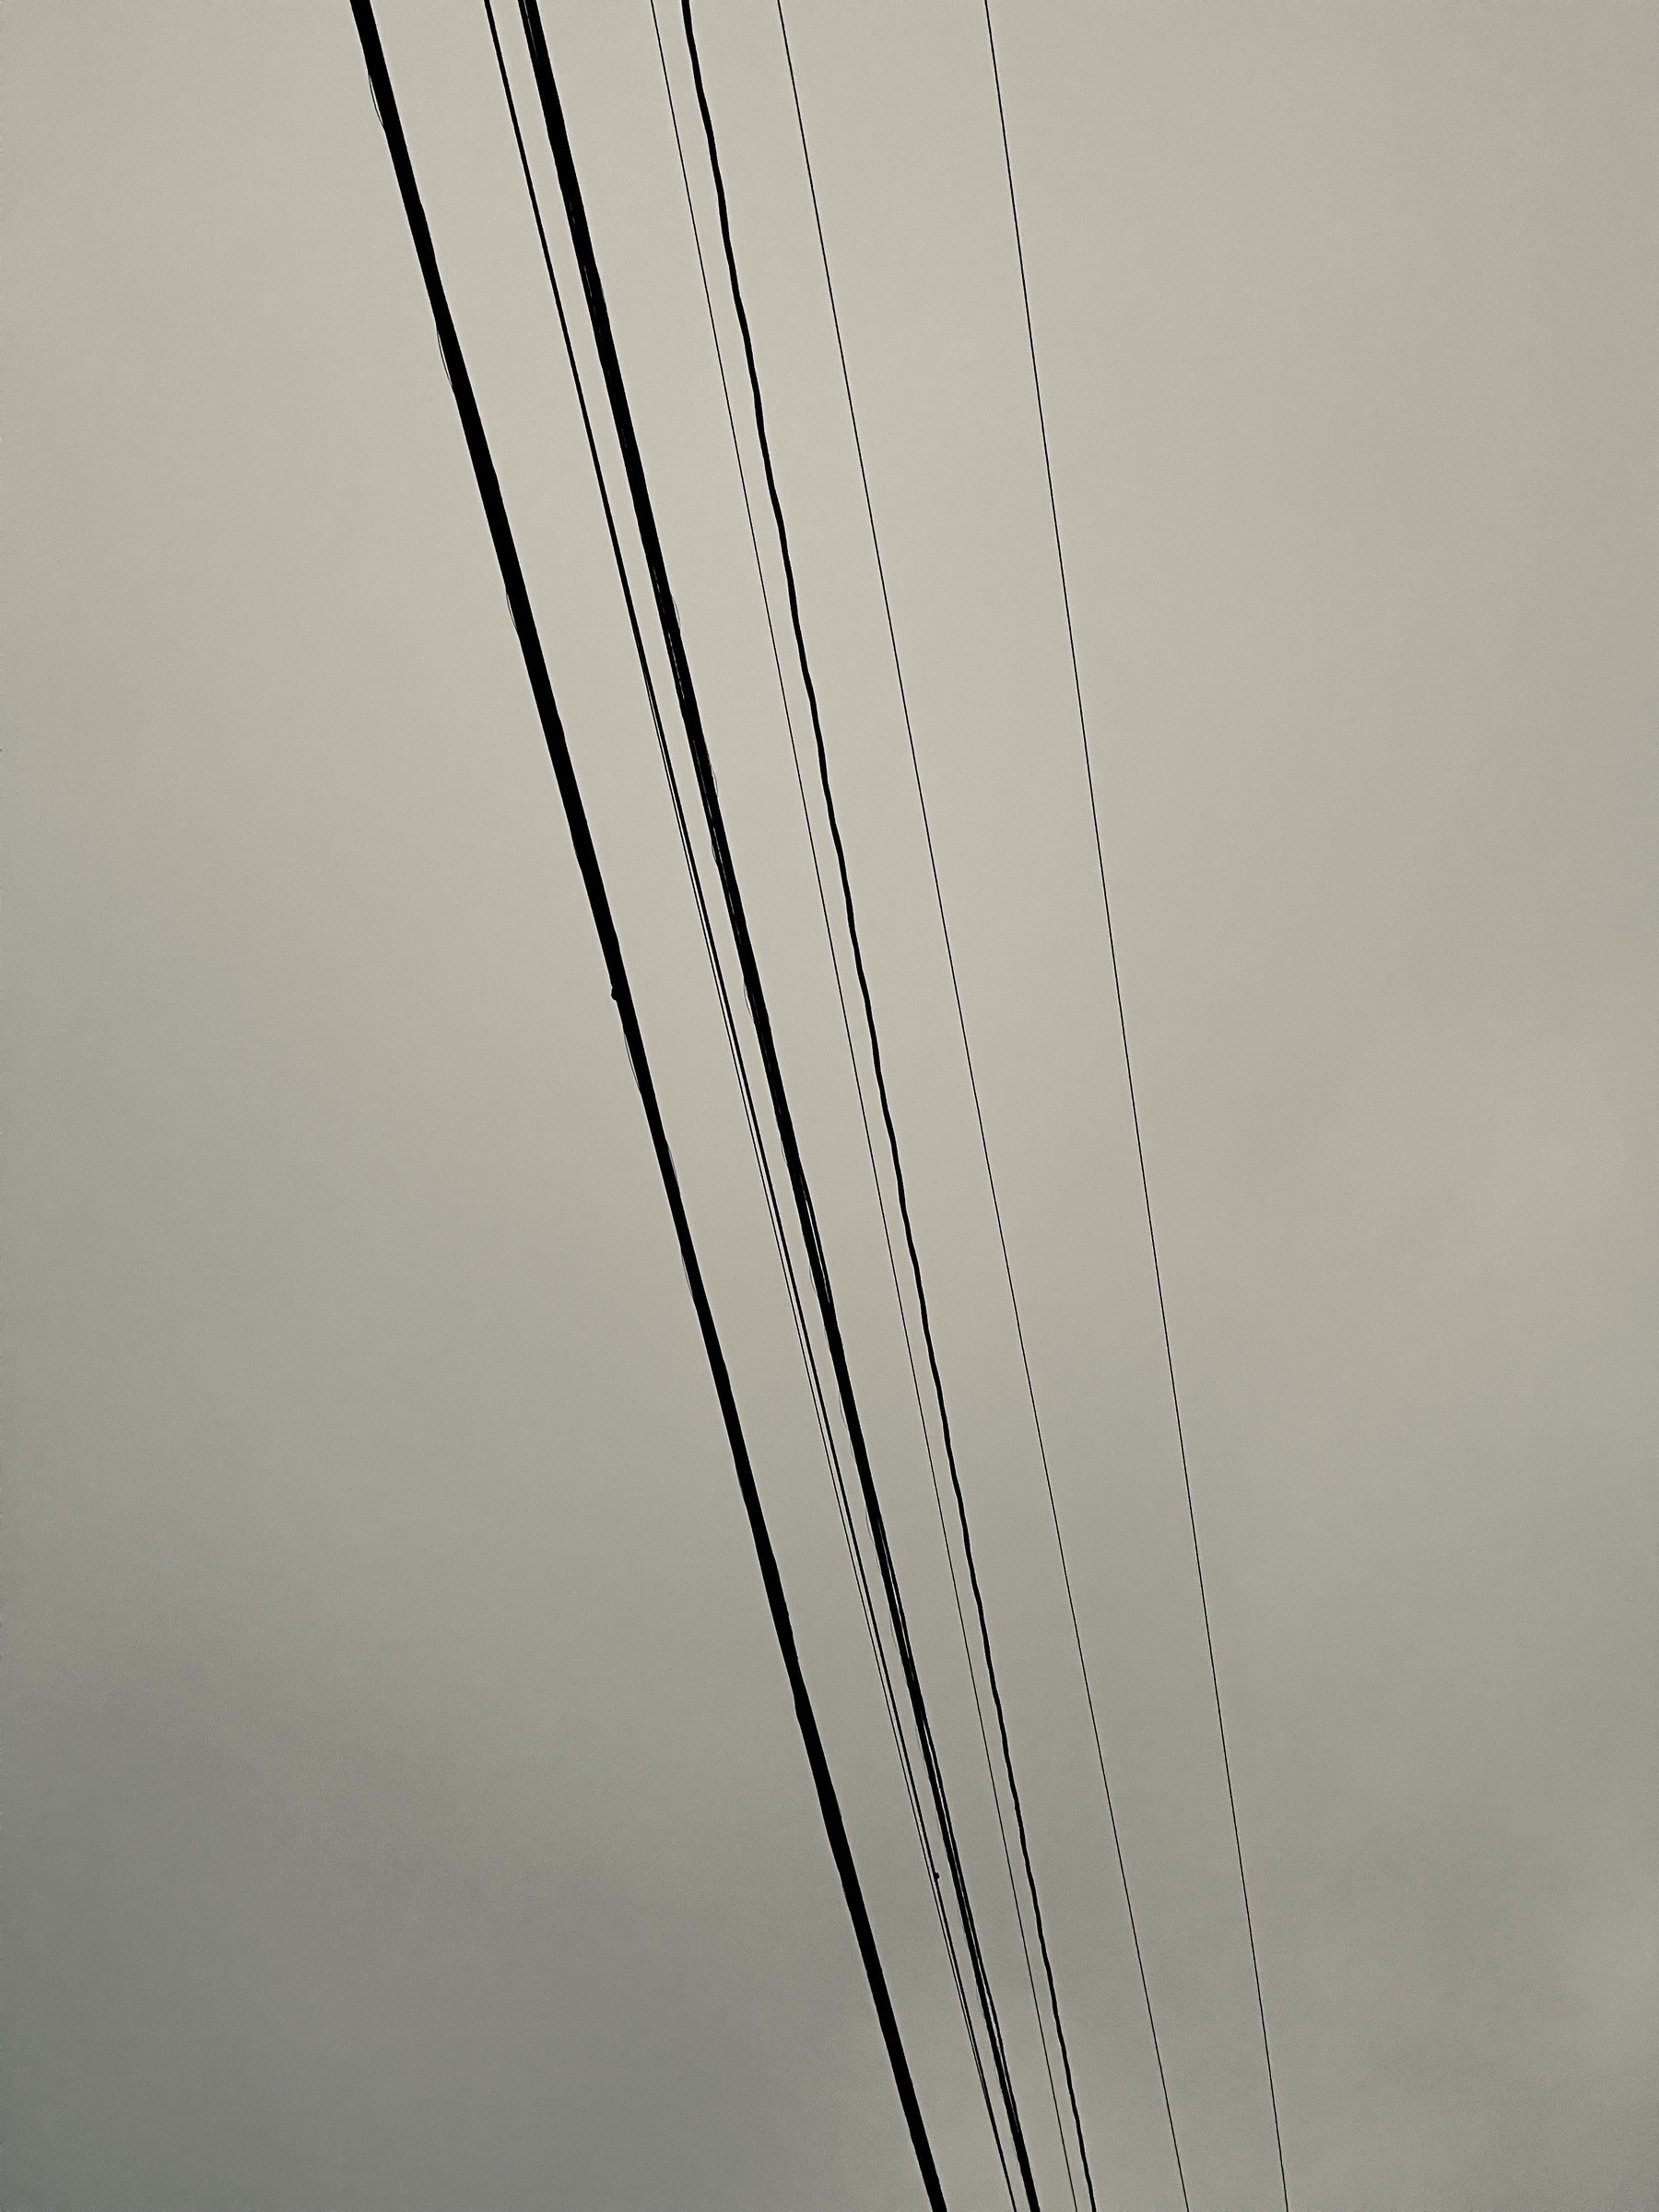 Wires against a cloudy sky, running from bottom right of center to top left of center.